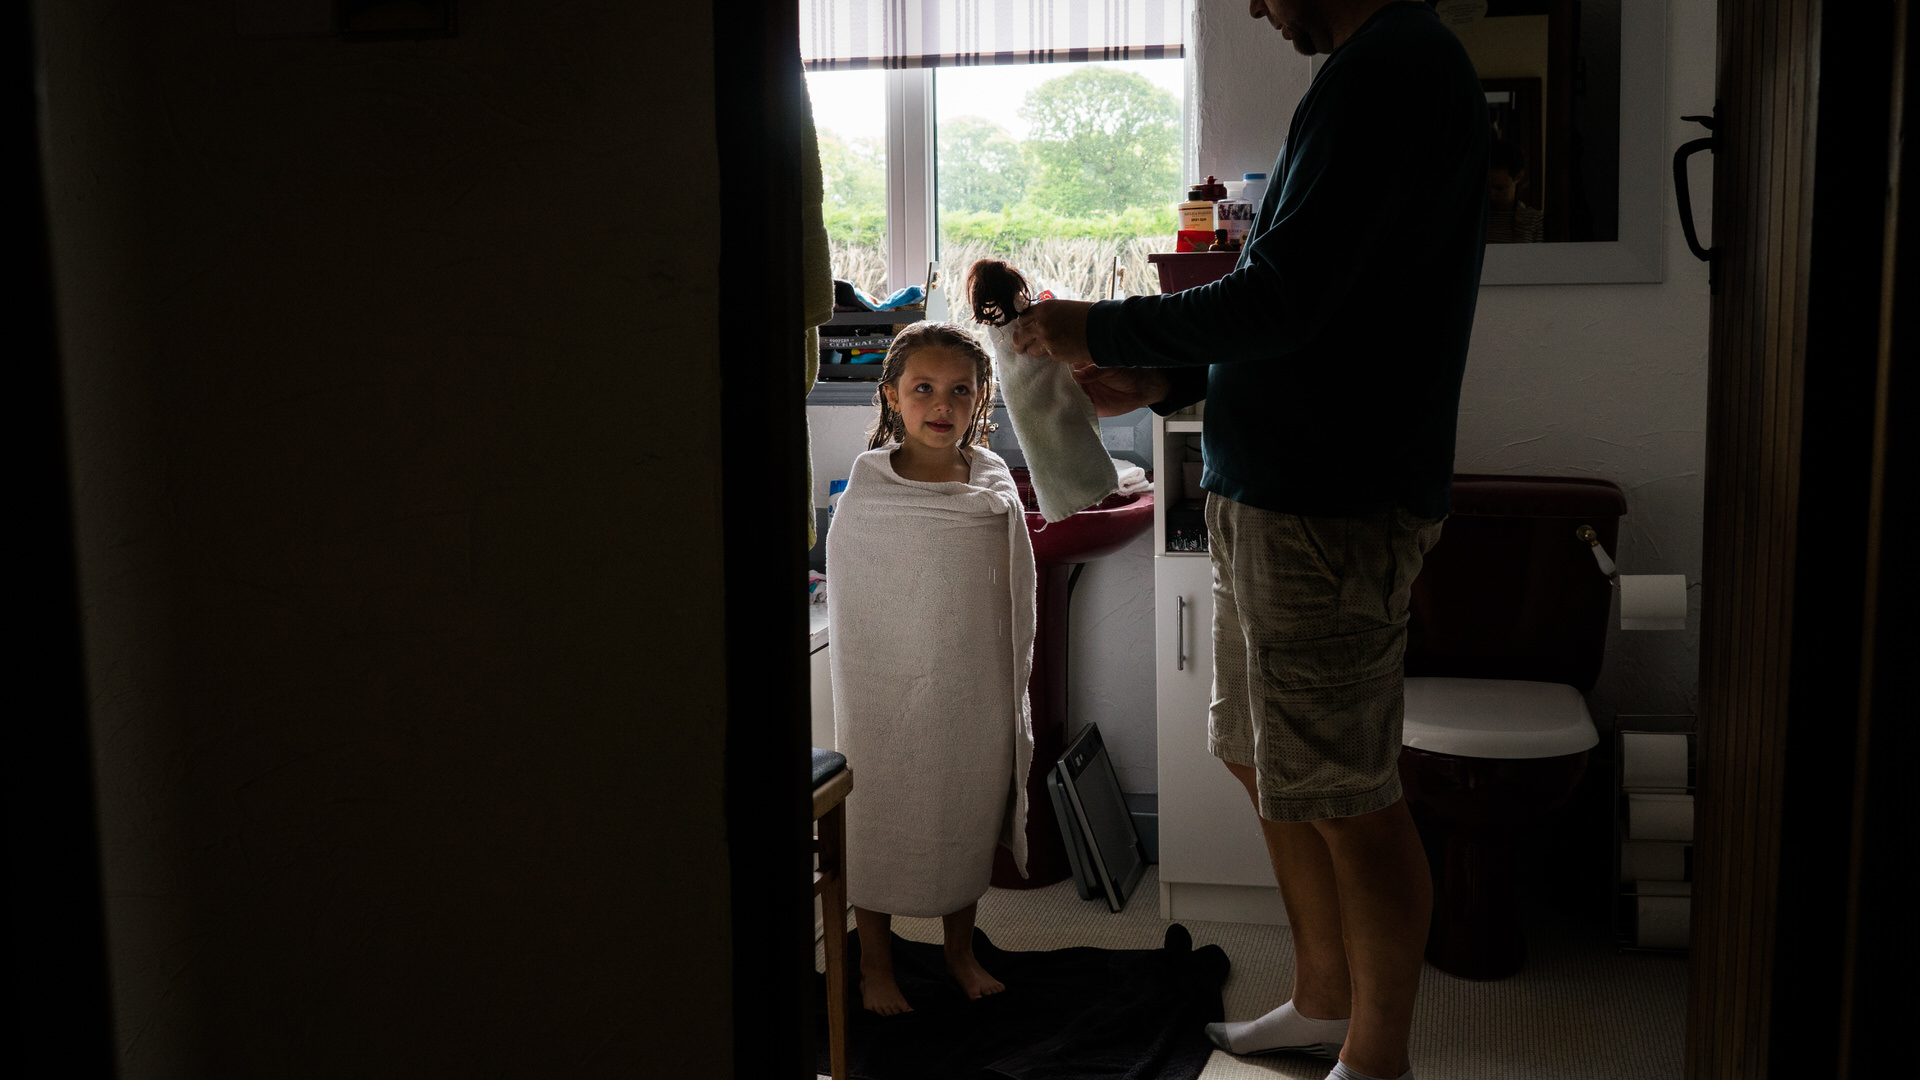 dad wraps up Barbie in a matching towel after a bath during a family photography session